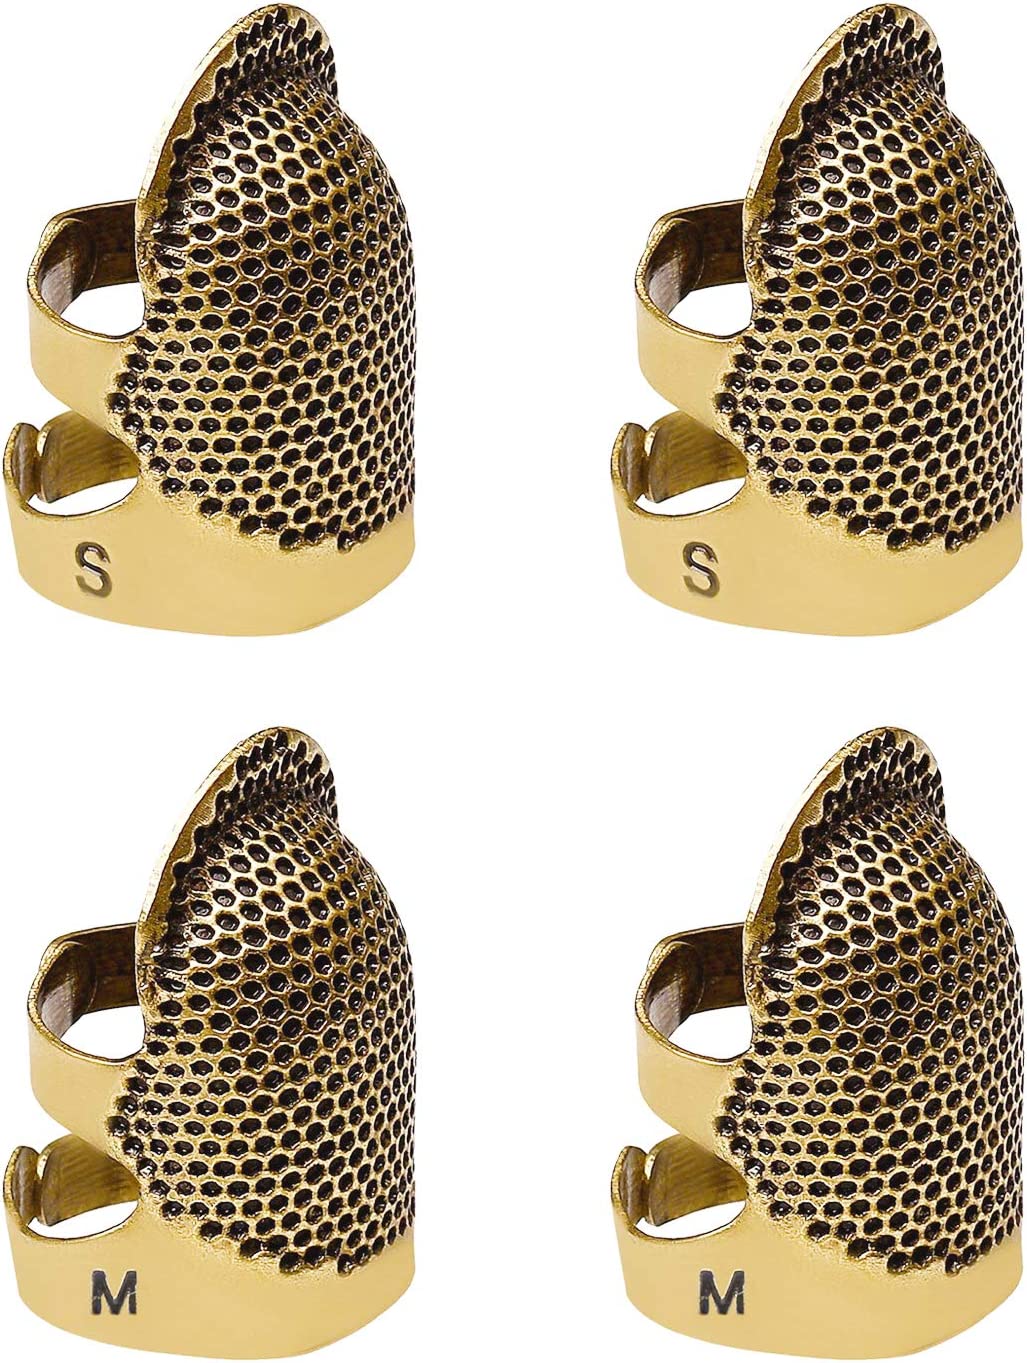 11Pcs Sewing Thimble Finger Protectors, Adjustable Metal Copper Finger  Thimble Silicone Leather Thimble Finger Tips Finger Shield Ring Fingertip